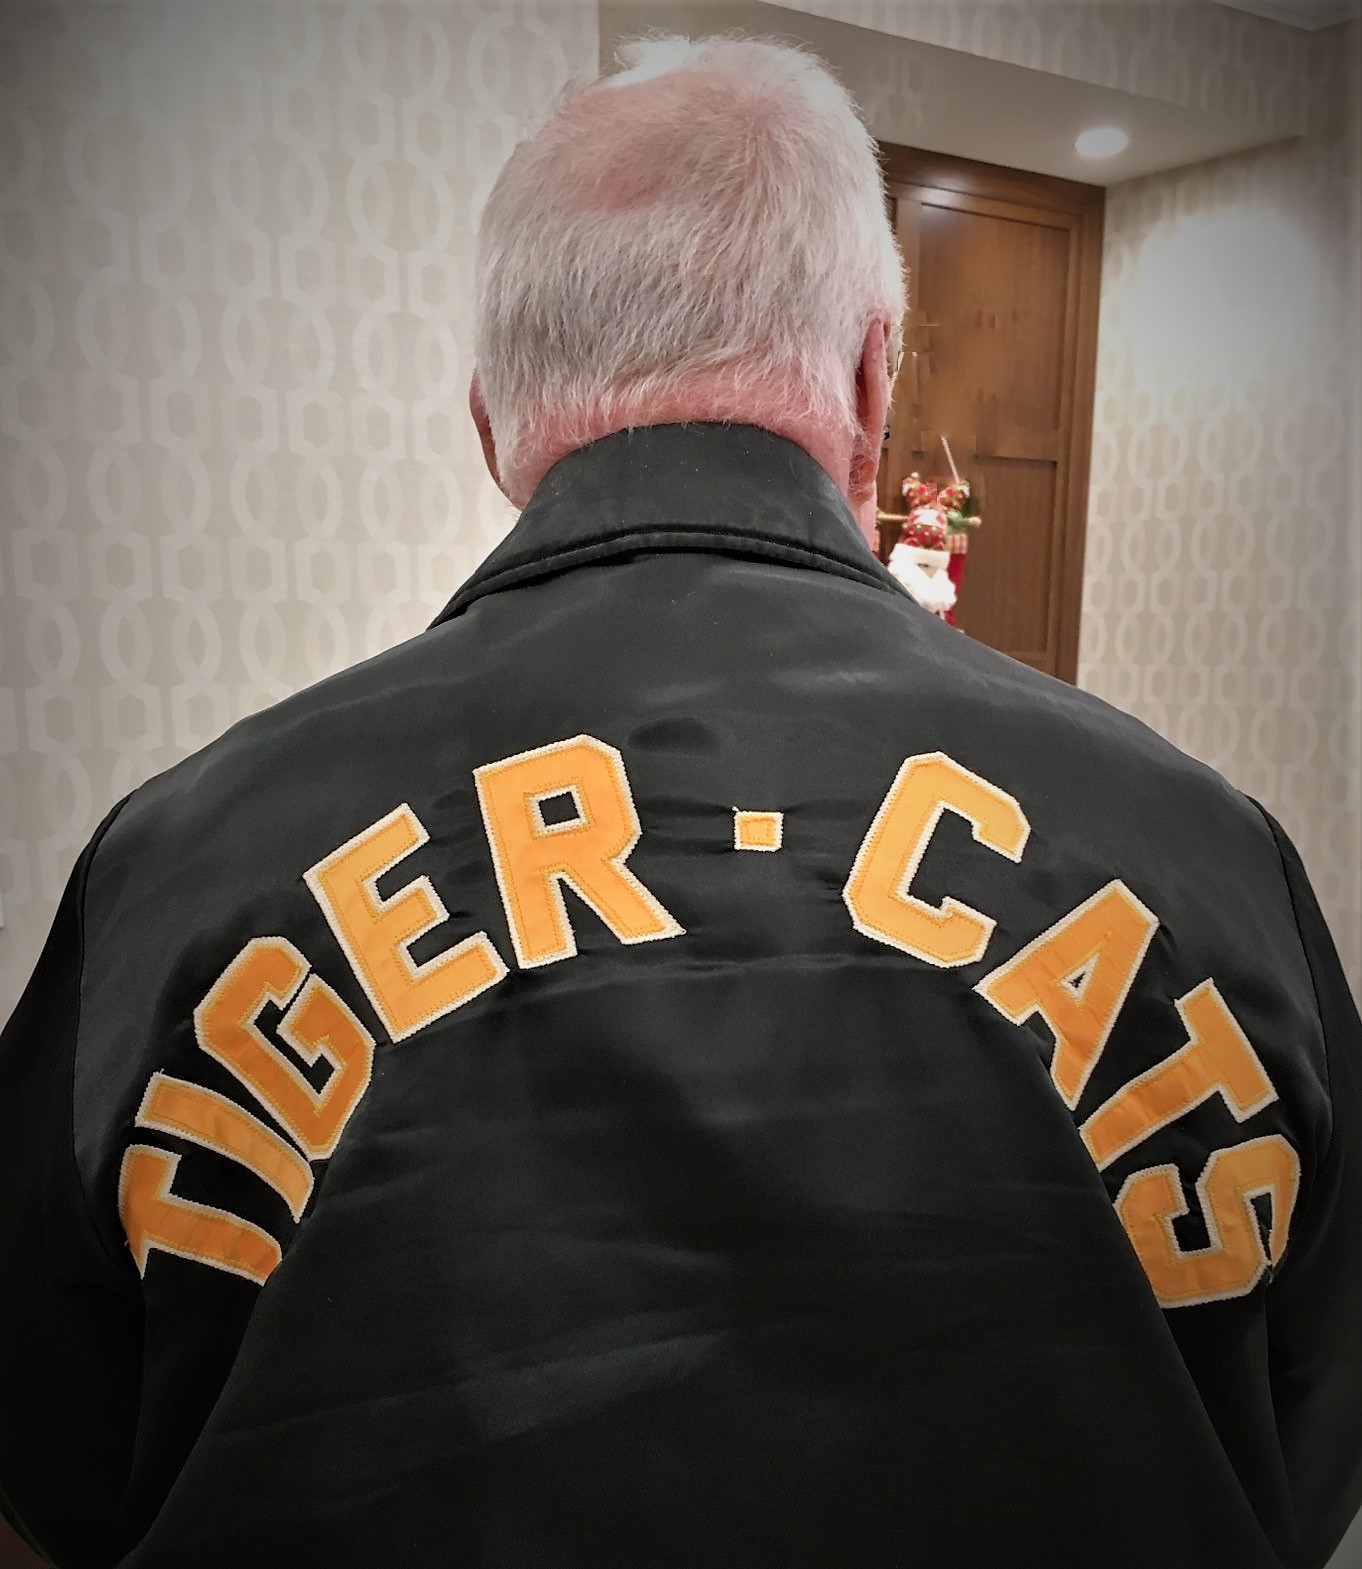 Old man wearing a tiger-cats jacket